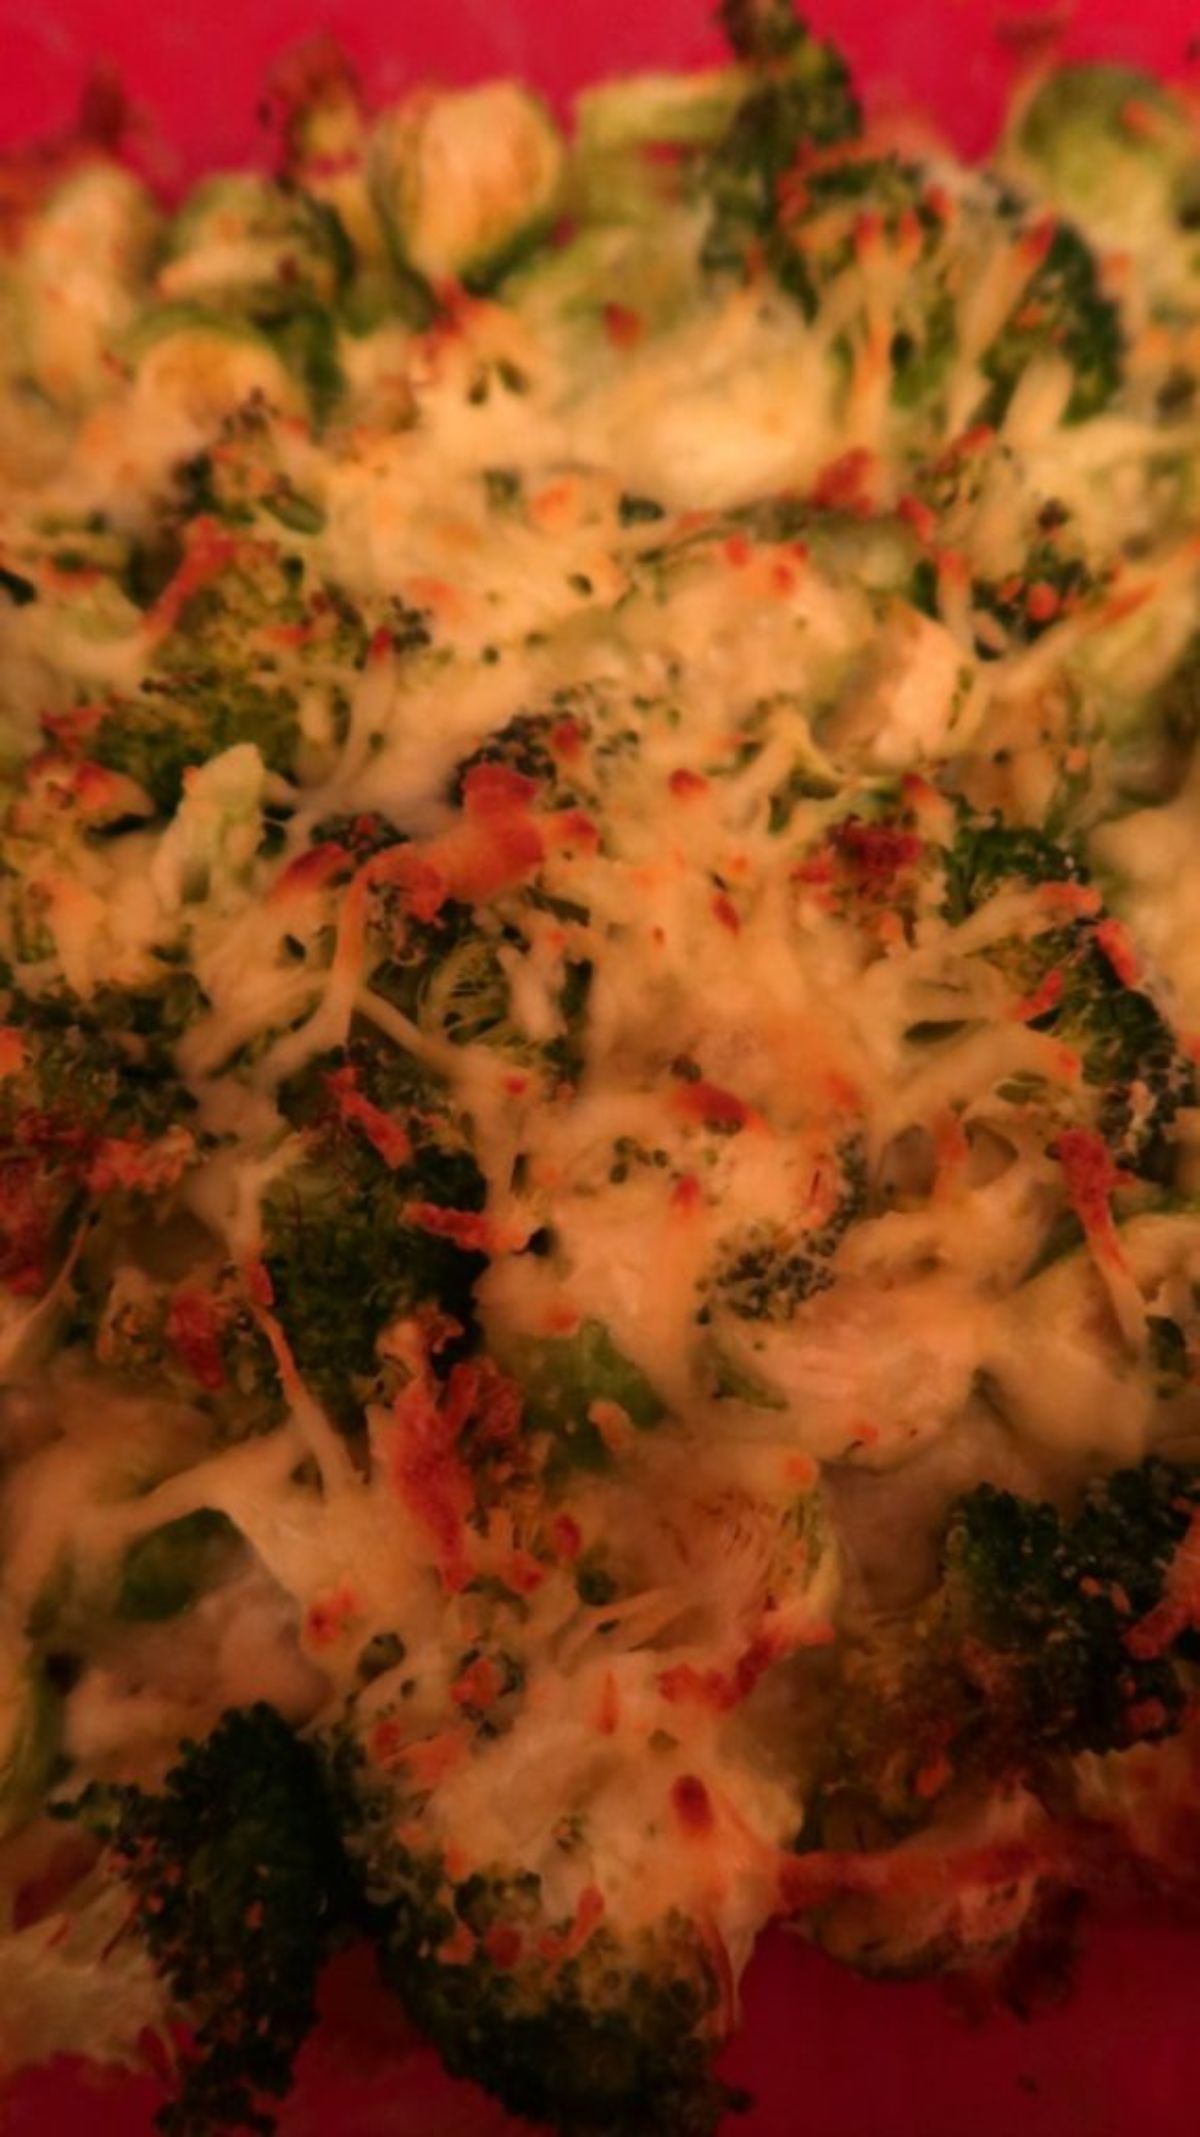 A section of a cheesy broccoli casserole in a red dish